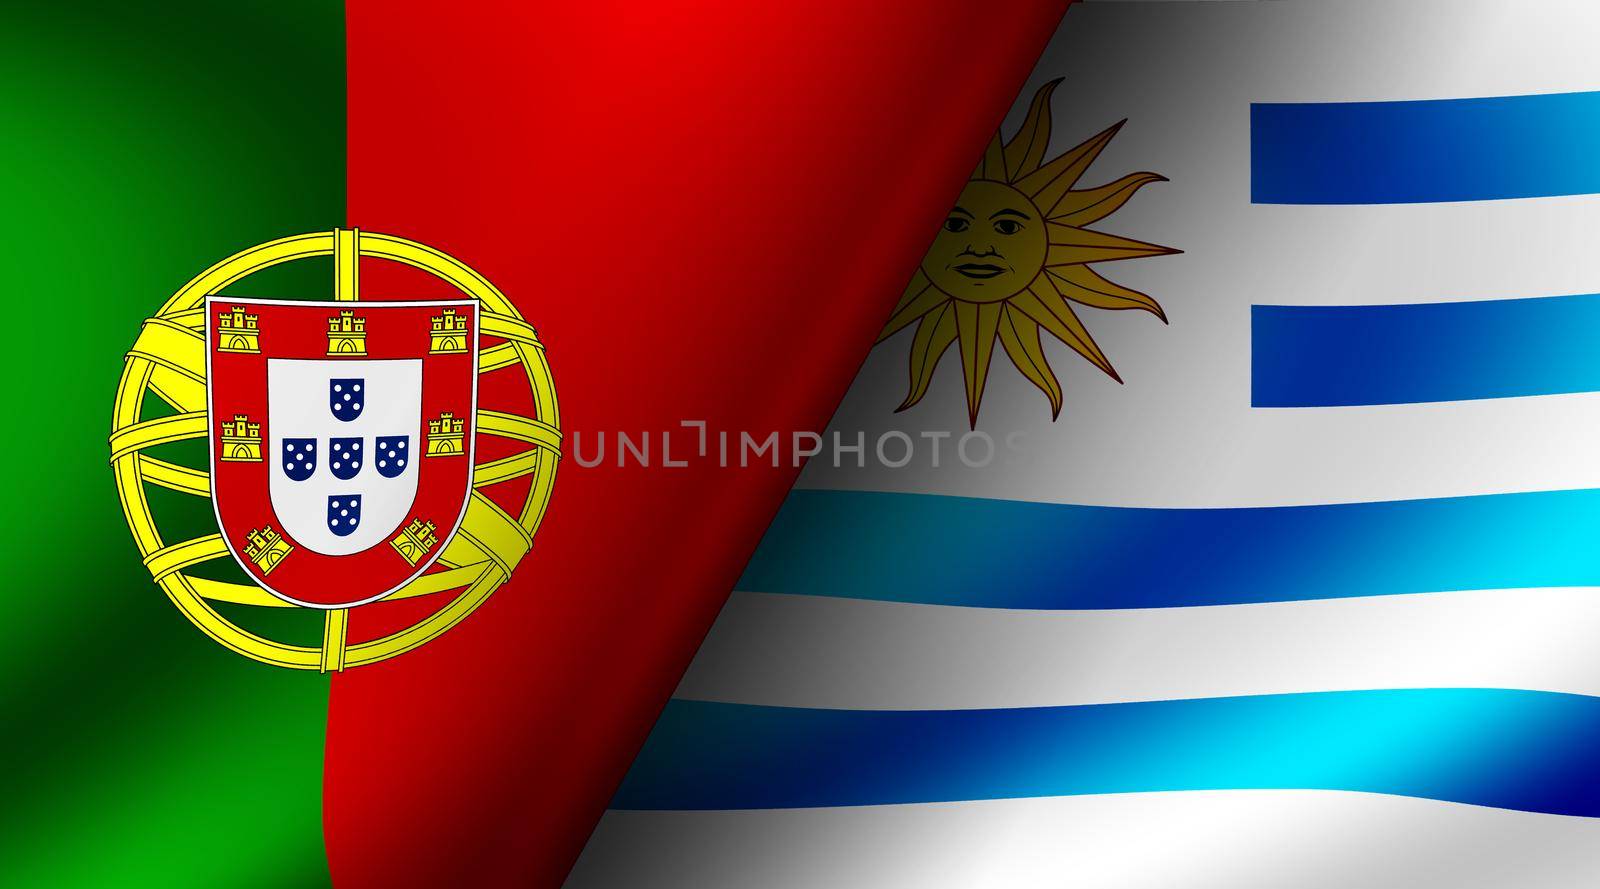 Football 2022 | Group Stage Match Cards (Portugal VS Uruguay)